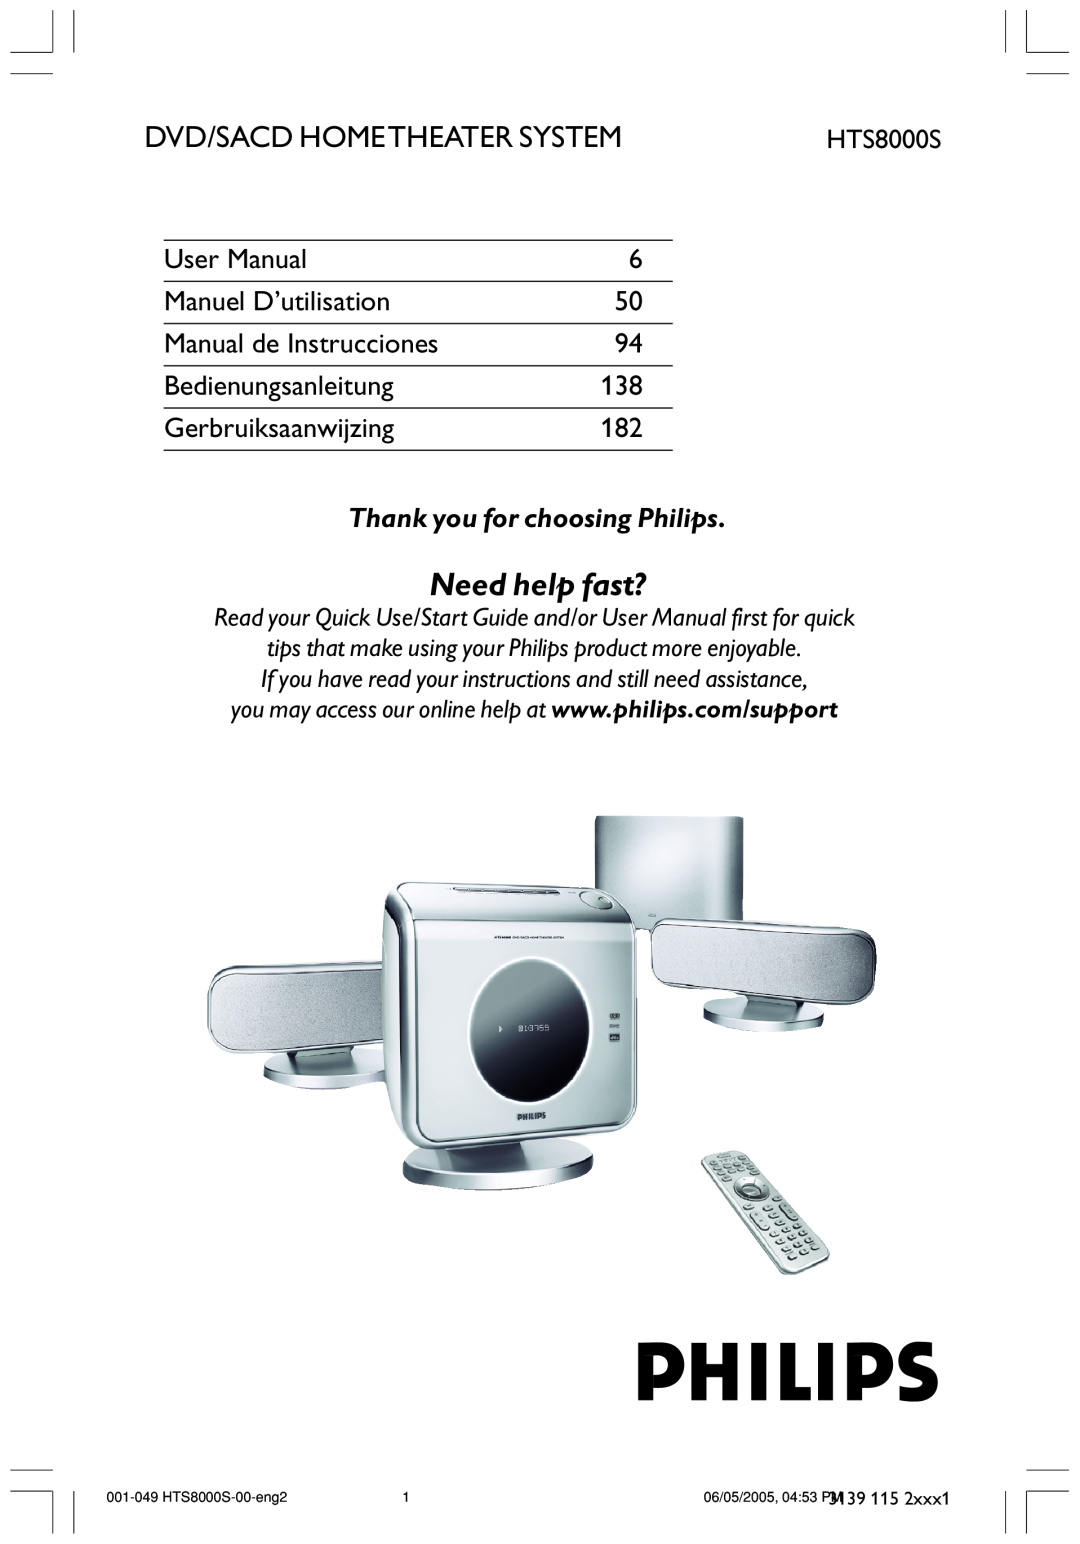 Philips HTS8000S user manual Thank you for choosing Philips, Need help fast?, Dvd/Sacd Hometheater System 